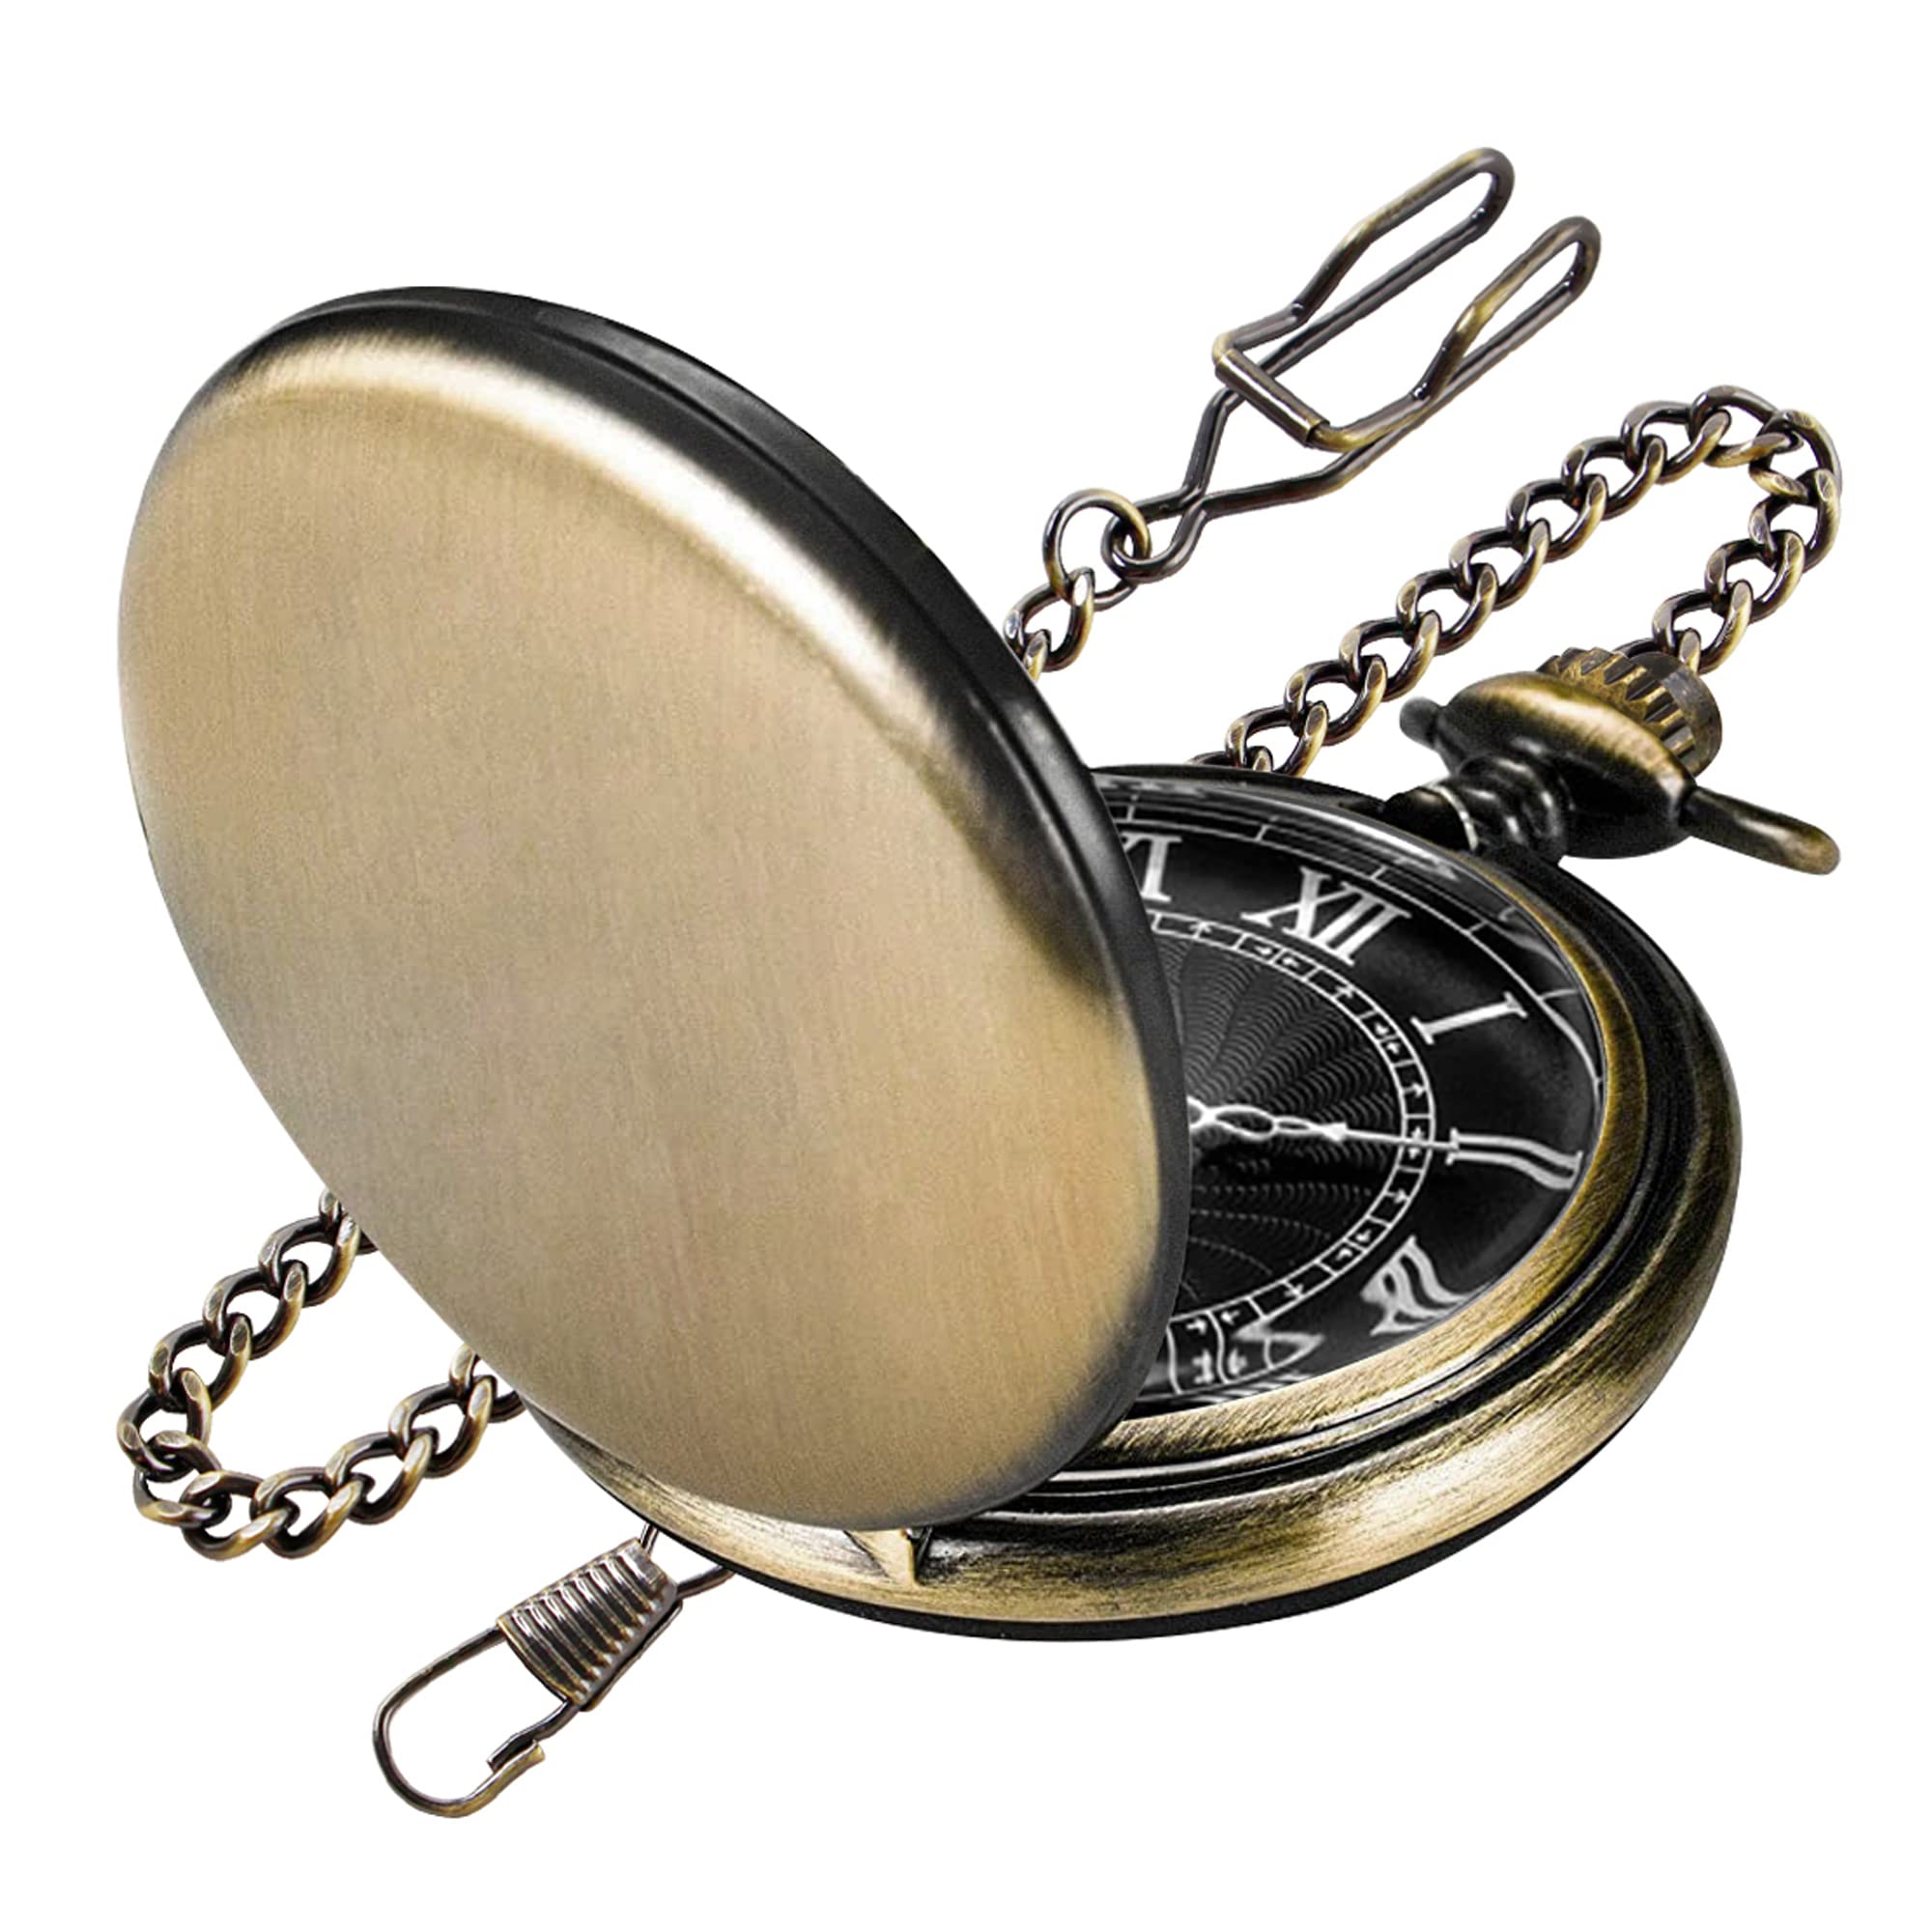 Smooth Pocket Watch for Men Quartz Arabic Digital Dial with Chain,Smooth Quartz Men's Pocket Watch with Chain for Christmas Graduation Birthday Gifts Fathers Day Mothers Day